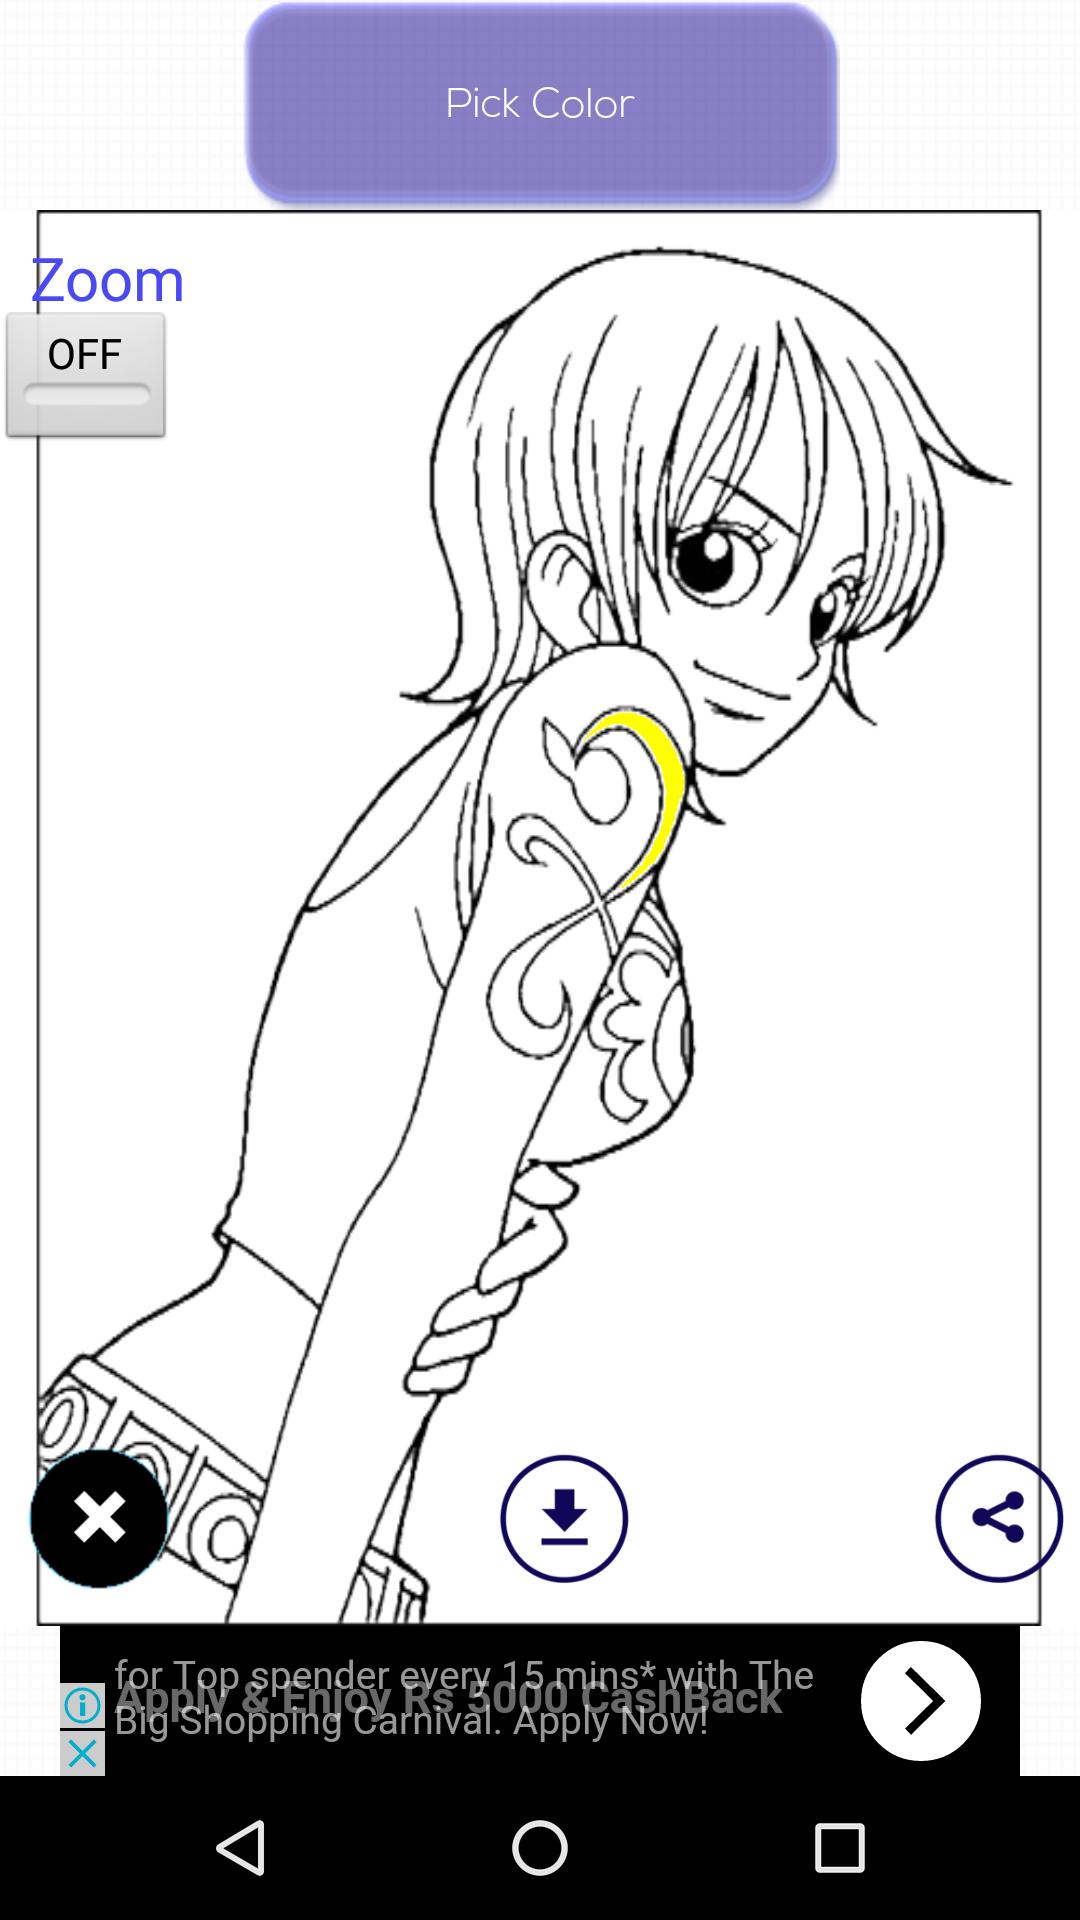 Anime Coloring Book for Android - APK Download